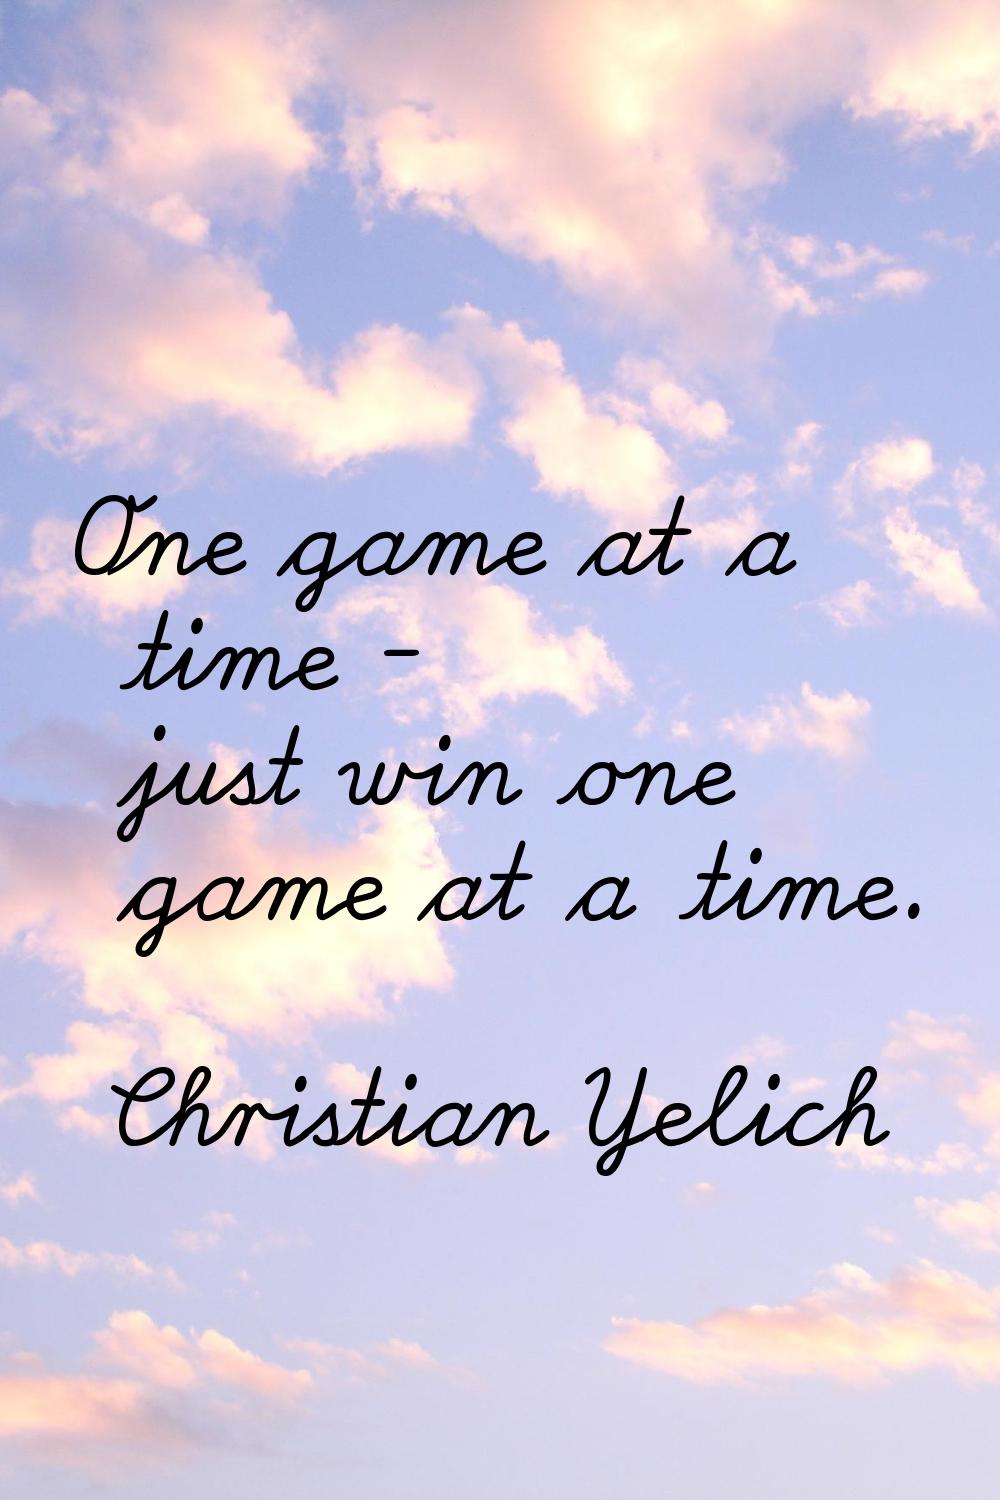 One game at a time - just win one game at a time.